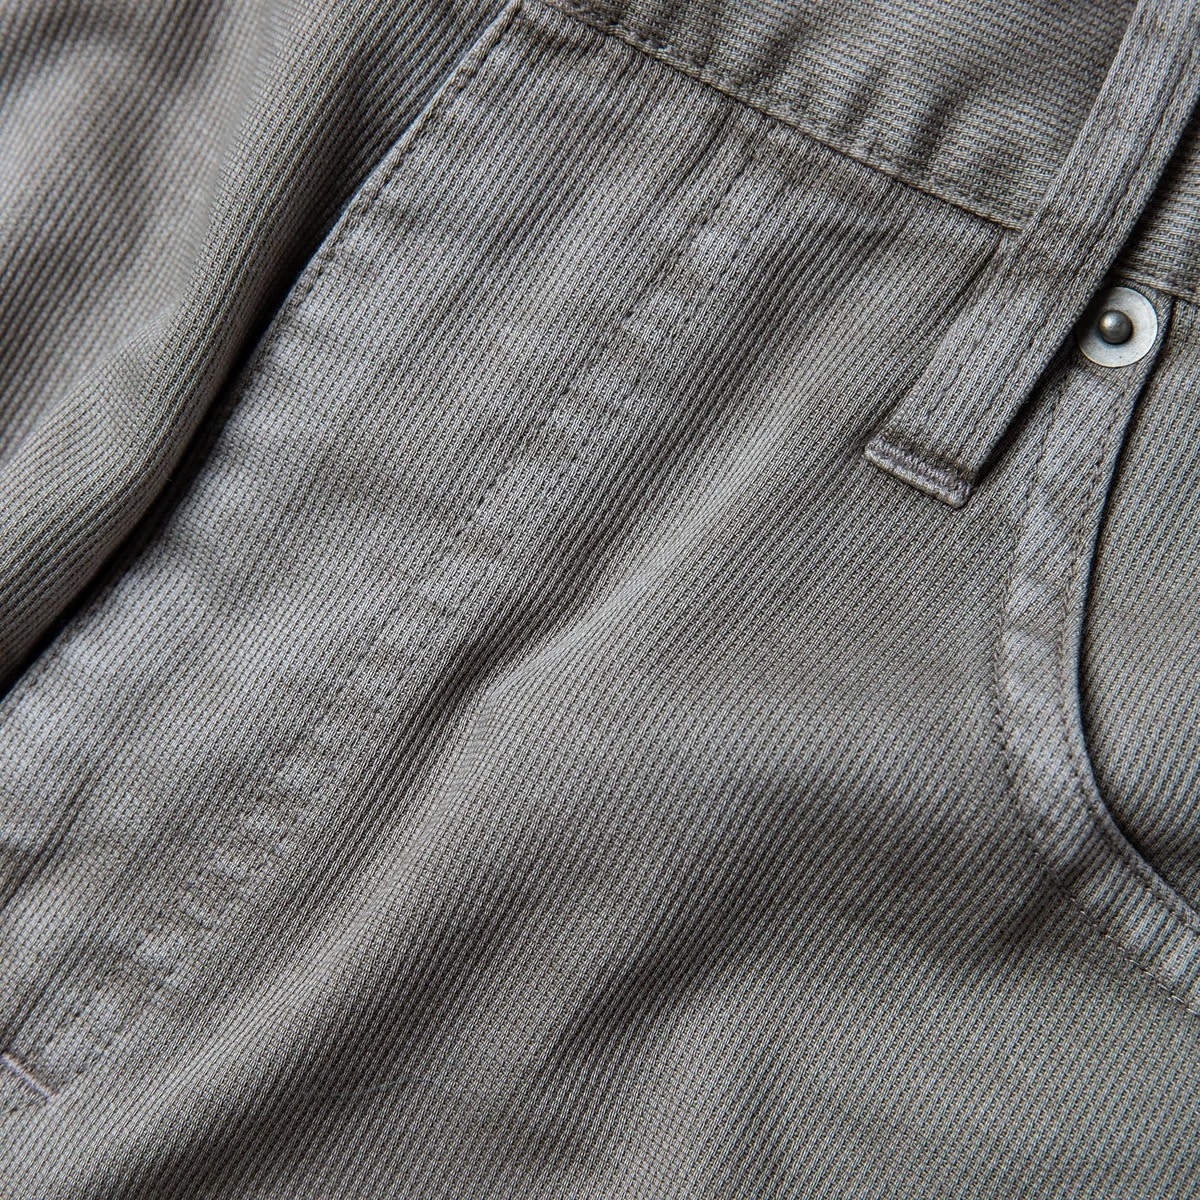 These Five-Pocket Bedford Cords Are the Best New All-Round Pants - Airows